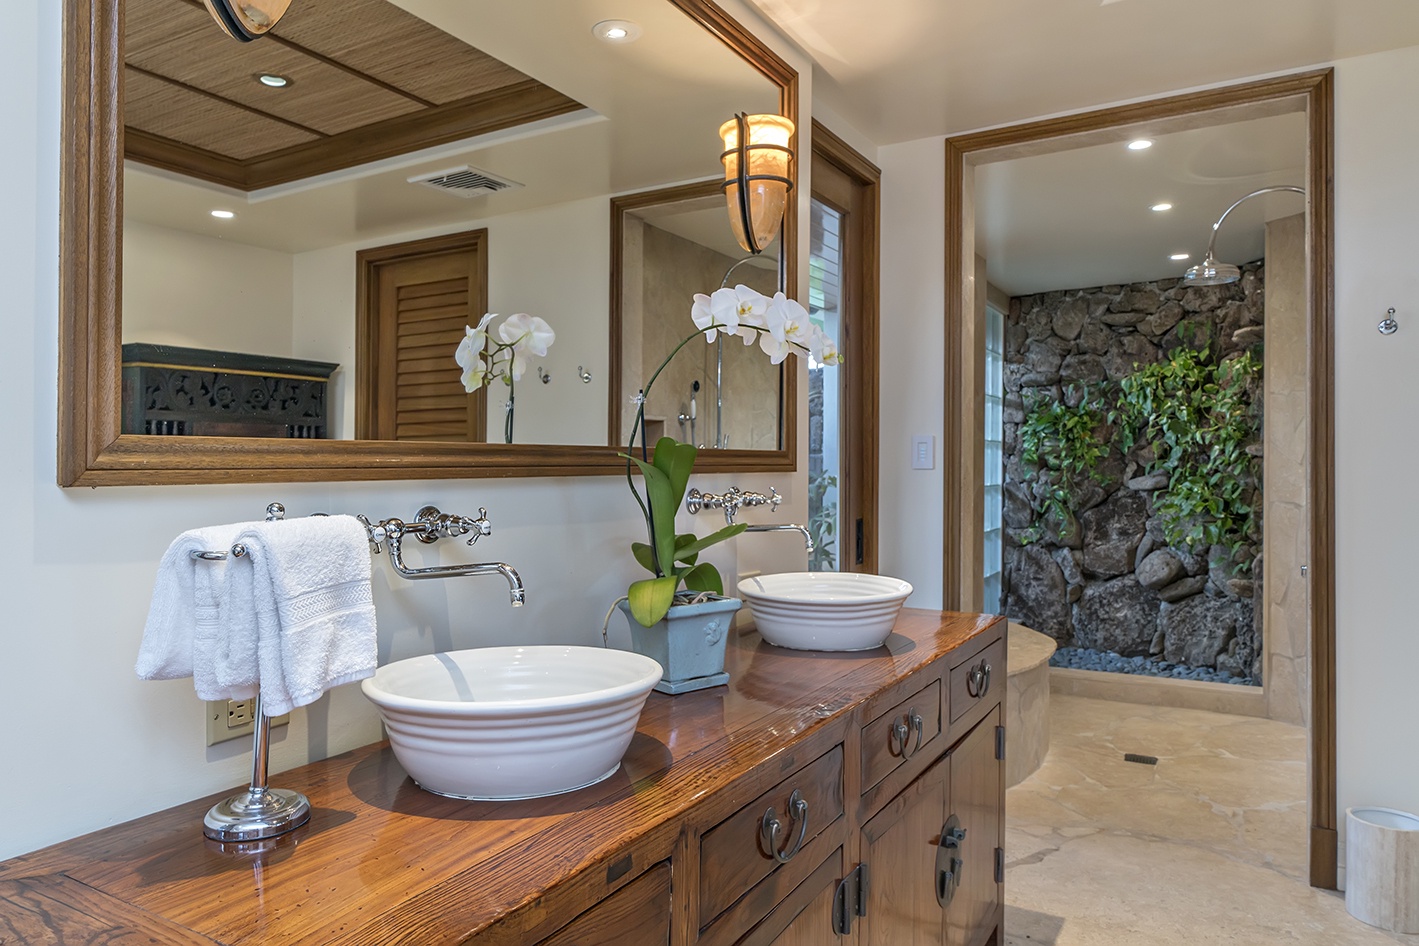 Kailua Vacation Rentals, Kailua's Kai Moena - Guest house: Primary Bathroom with walk in shower.